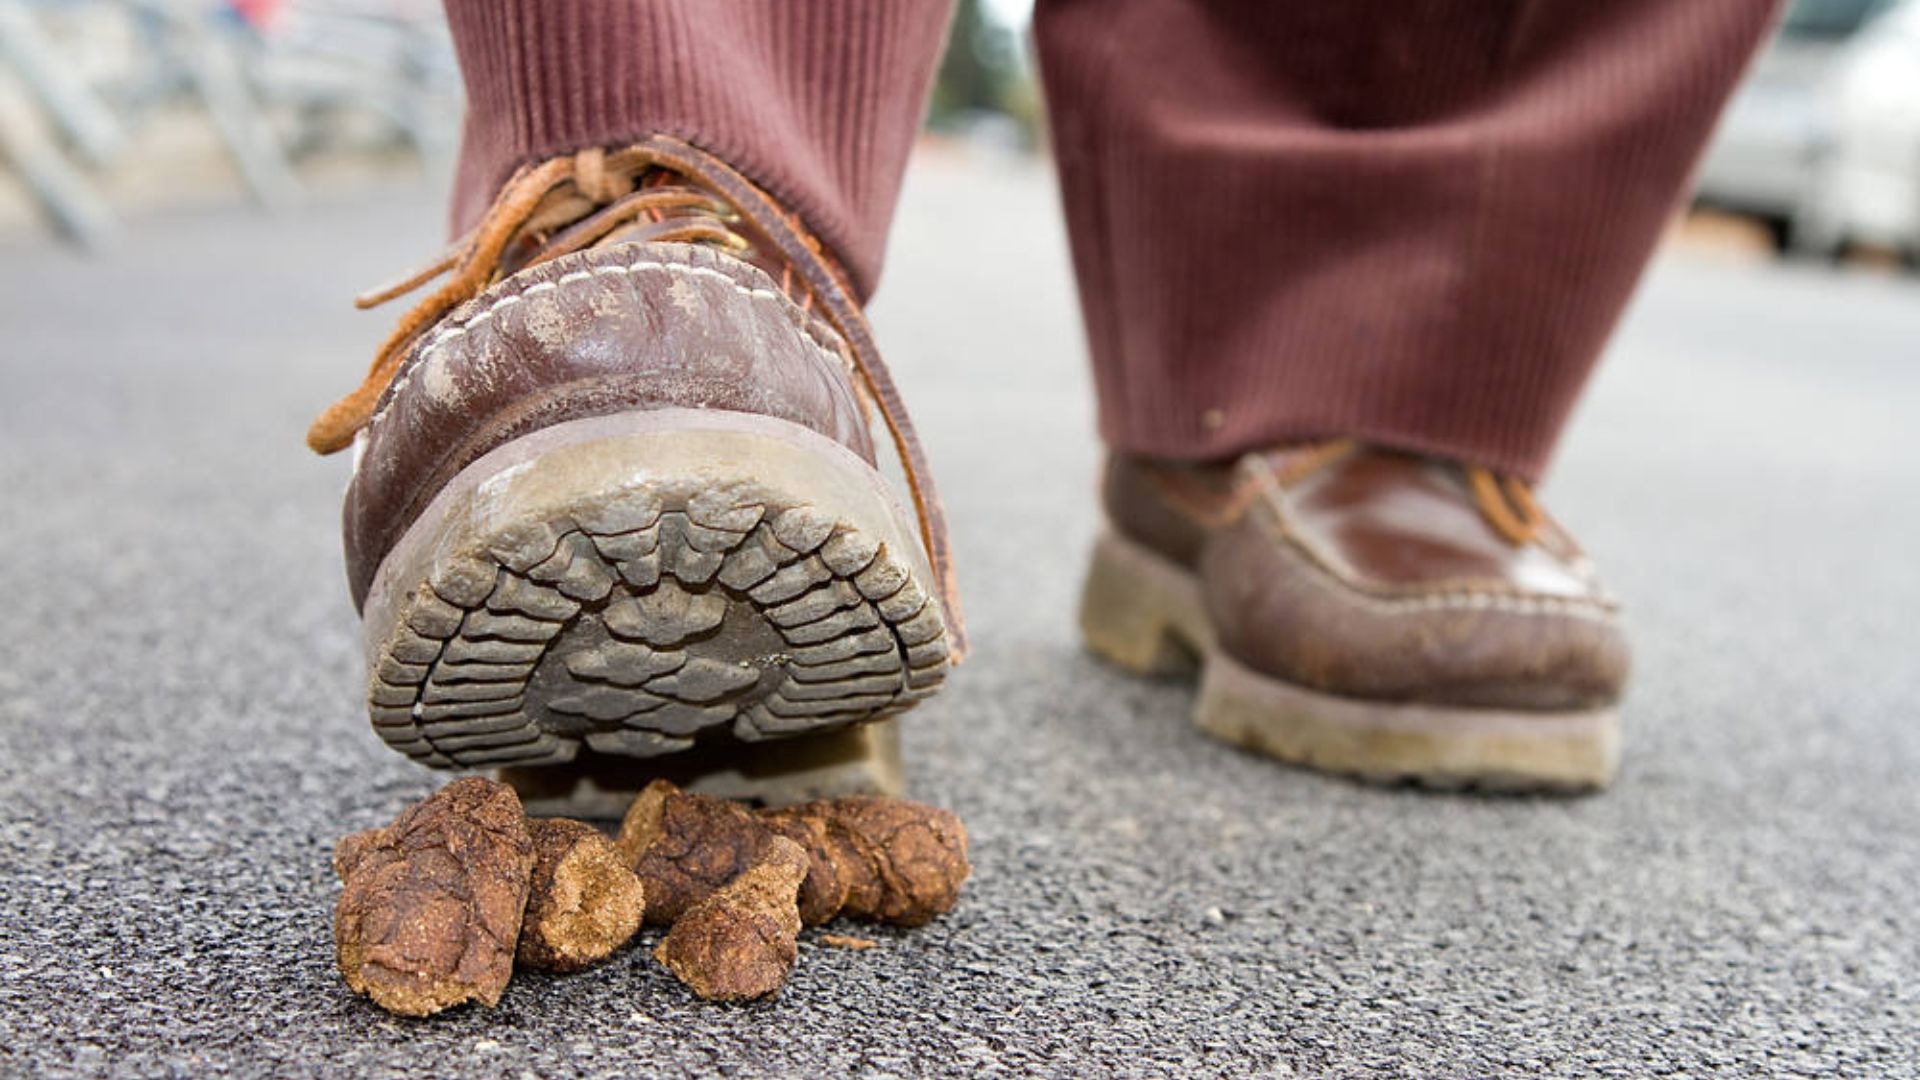 Man With Brown Shoes Stepping On Poop